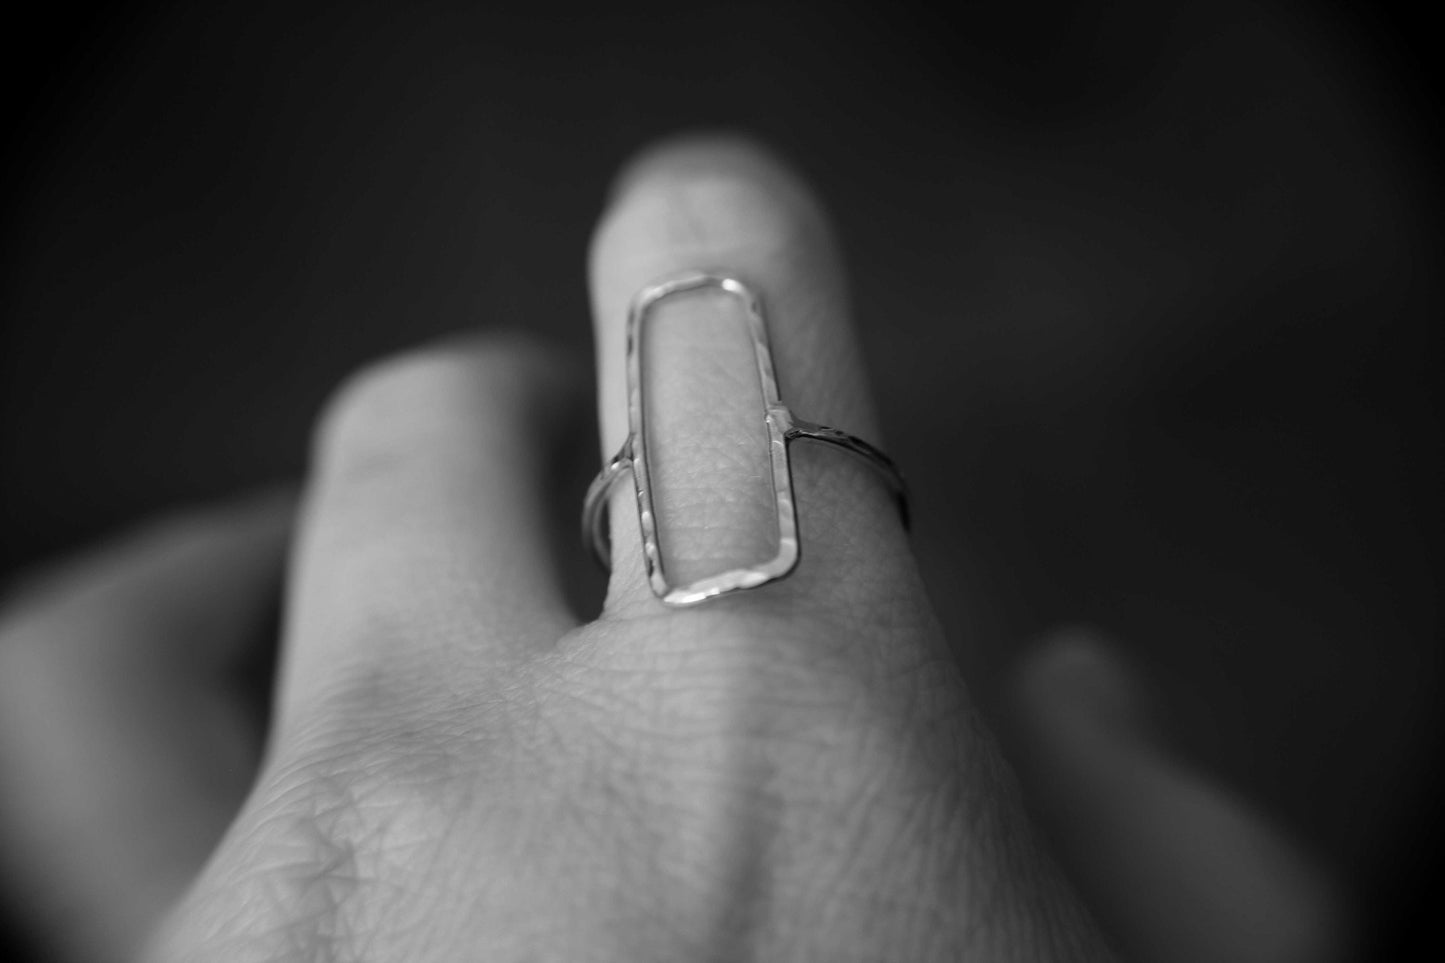 Rectangle Ring, Open Rectangle Ring, Long Modern Ring, Simple Open Ring, Rose Gold Ring, Open Rectangle Jewelry, Rectangle, Geometric Ring